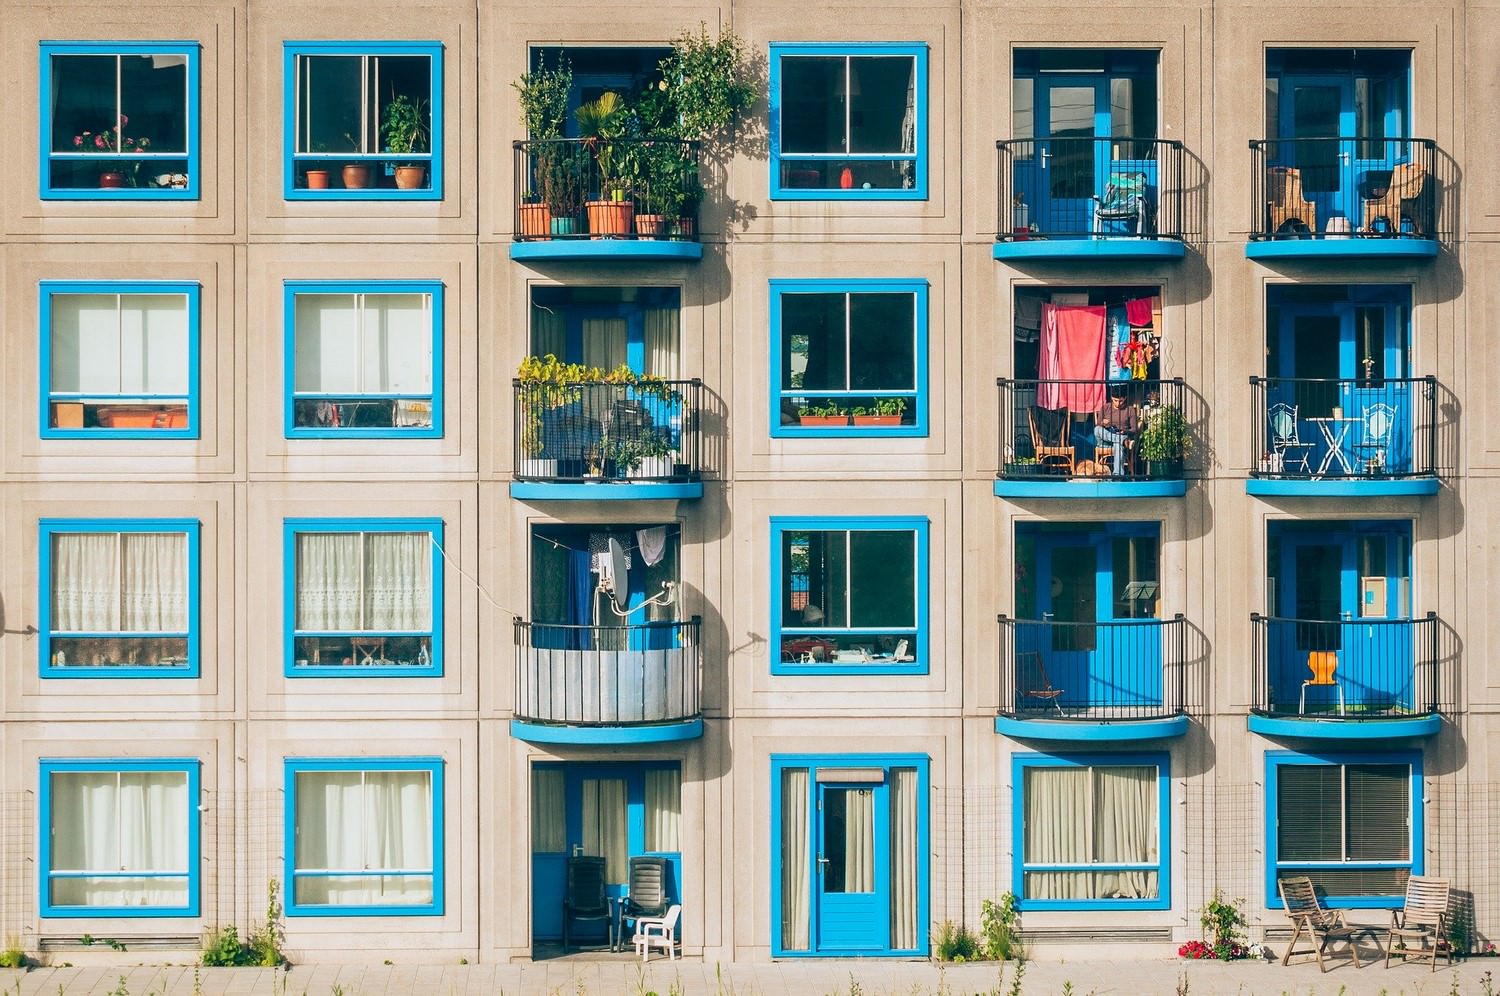 Tips for decorating small balconies. Photo: Pexels by Pixabay.